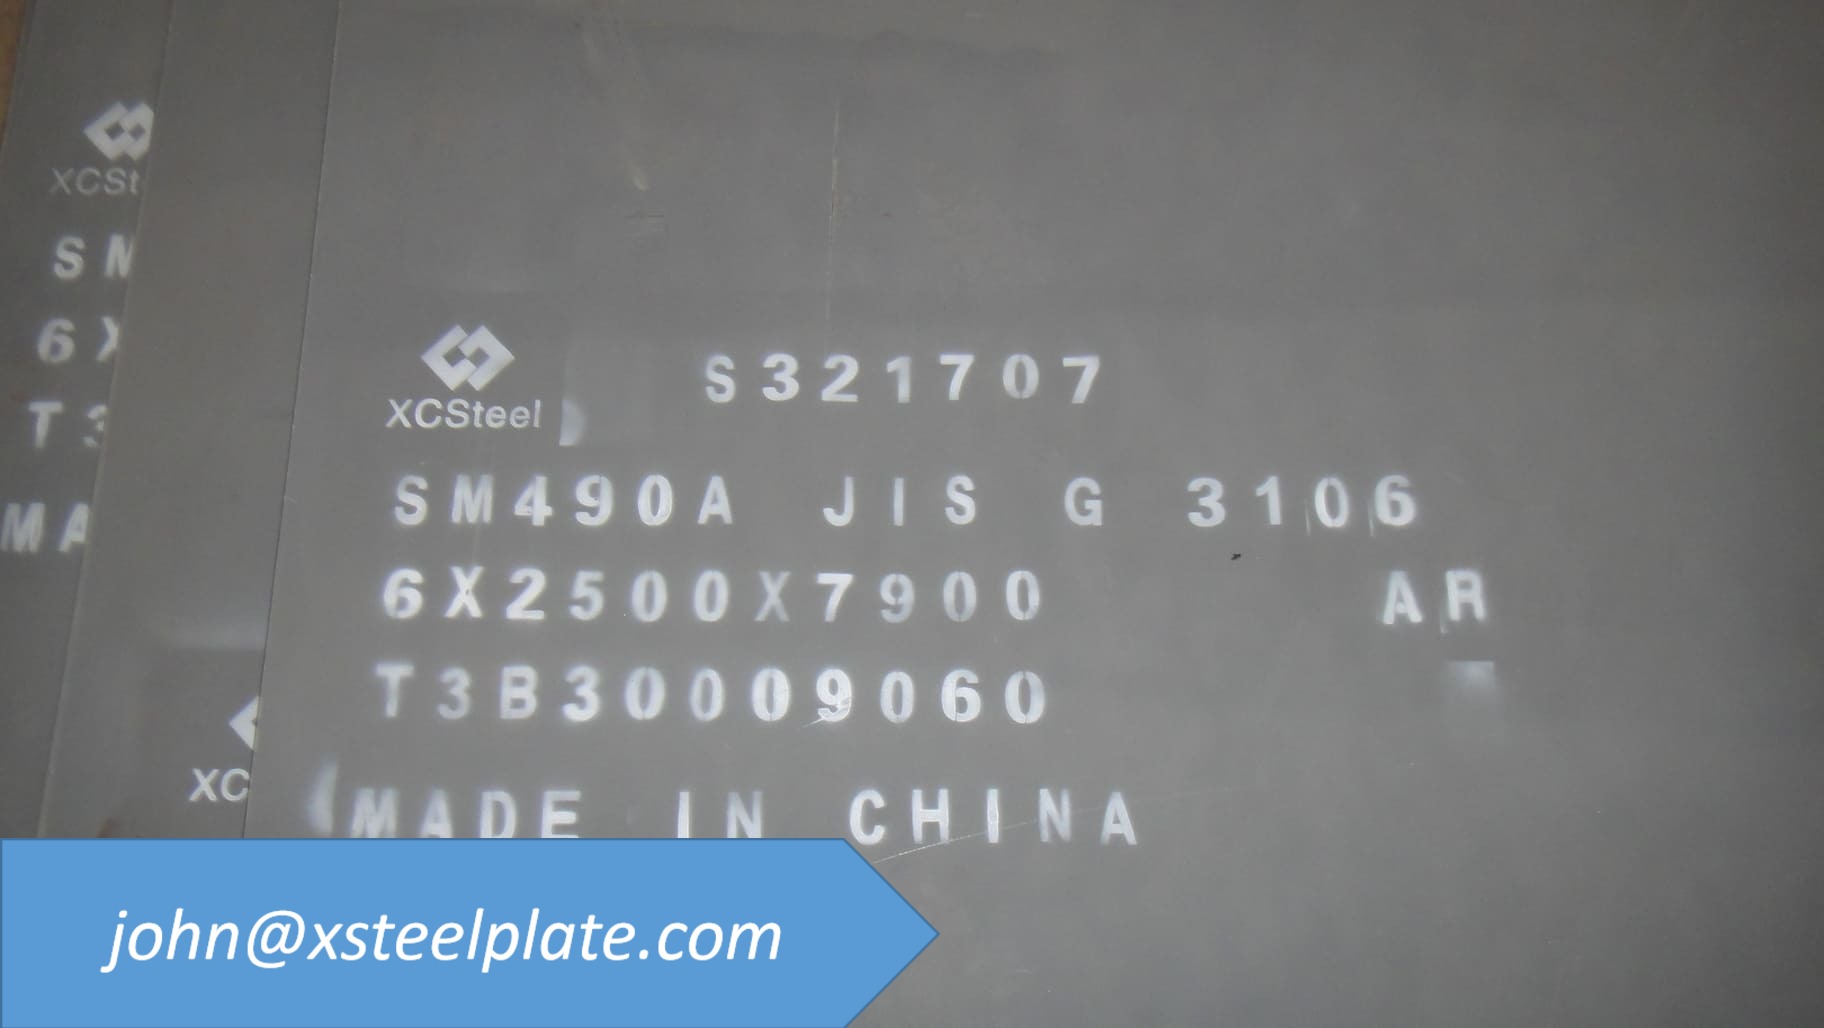 SM490a steel plate